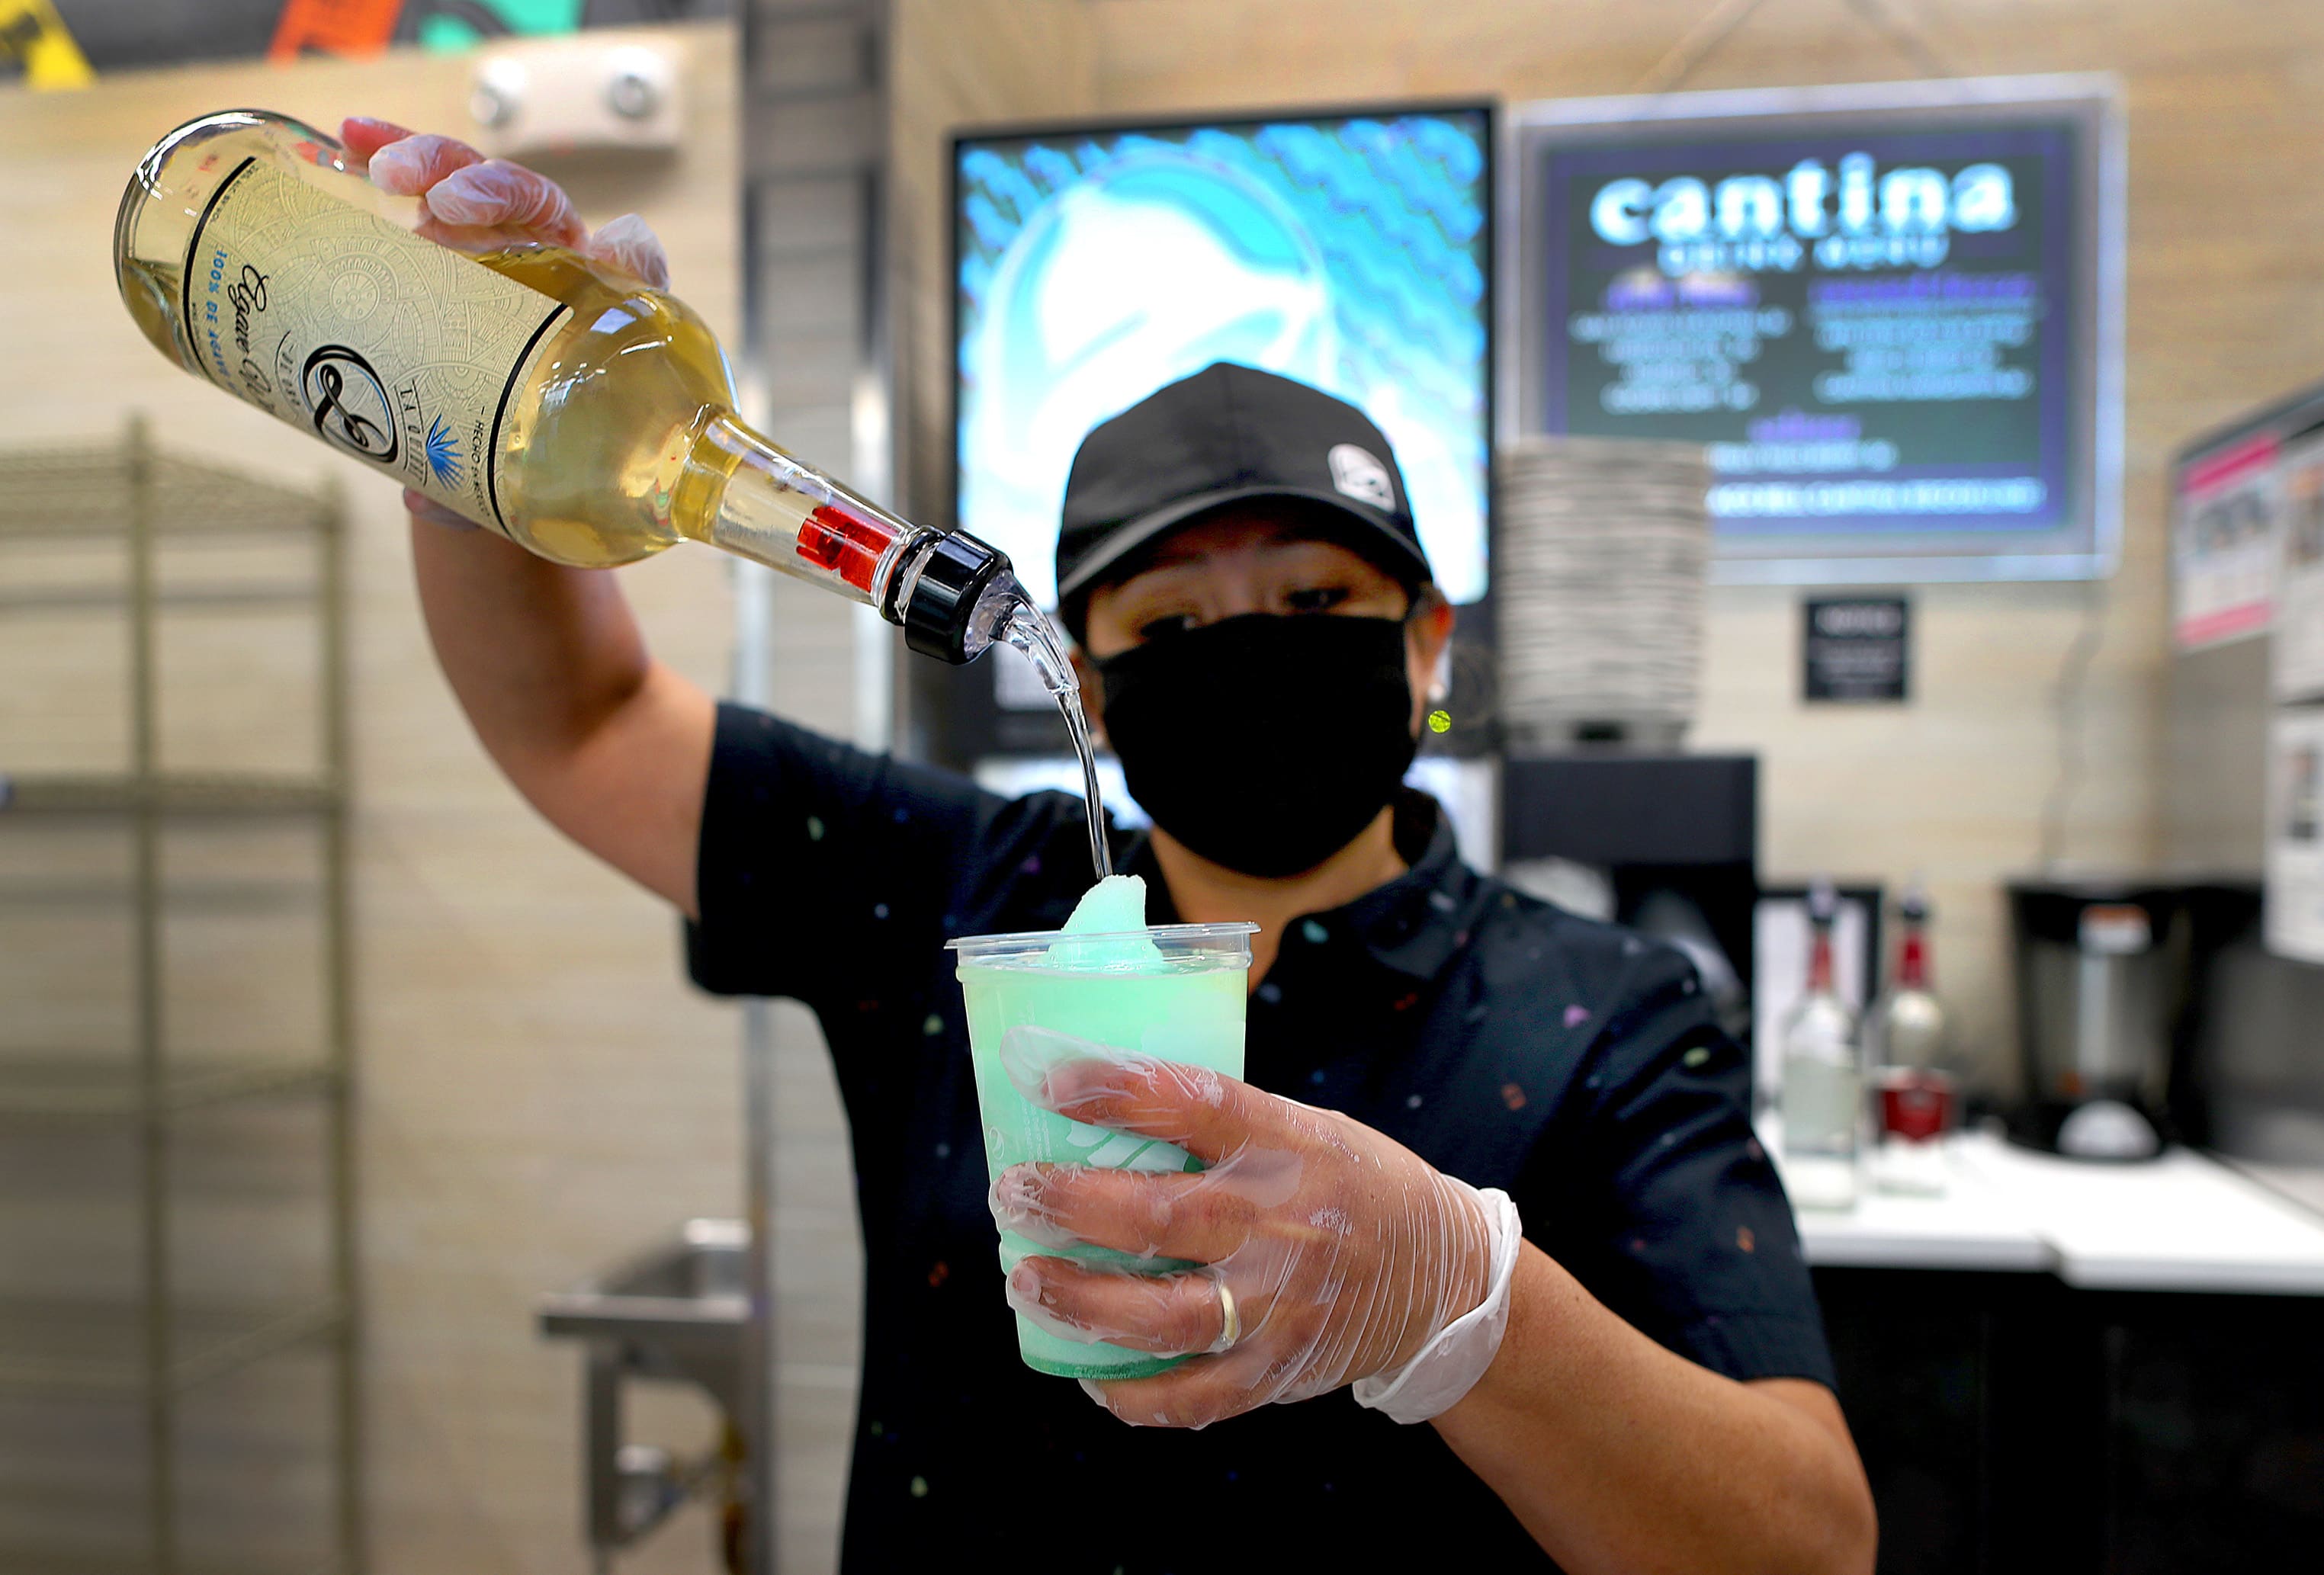 Tequila could overtake vodka as America’s favorite liquor as sales boom